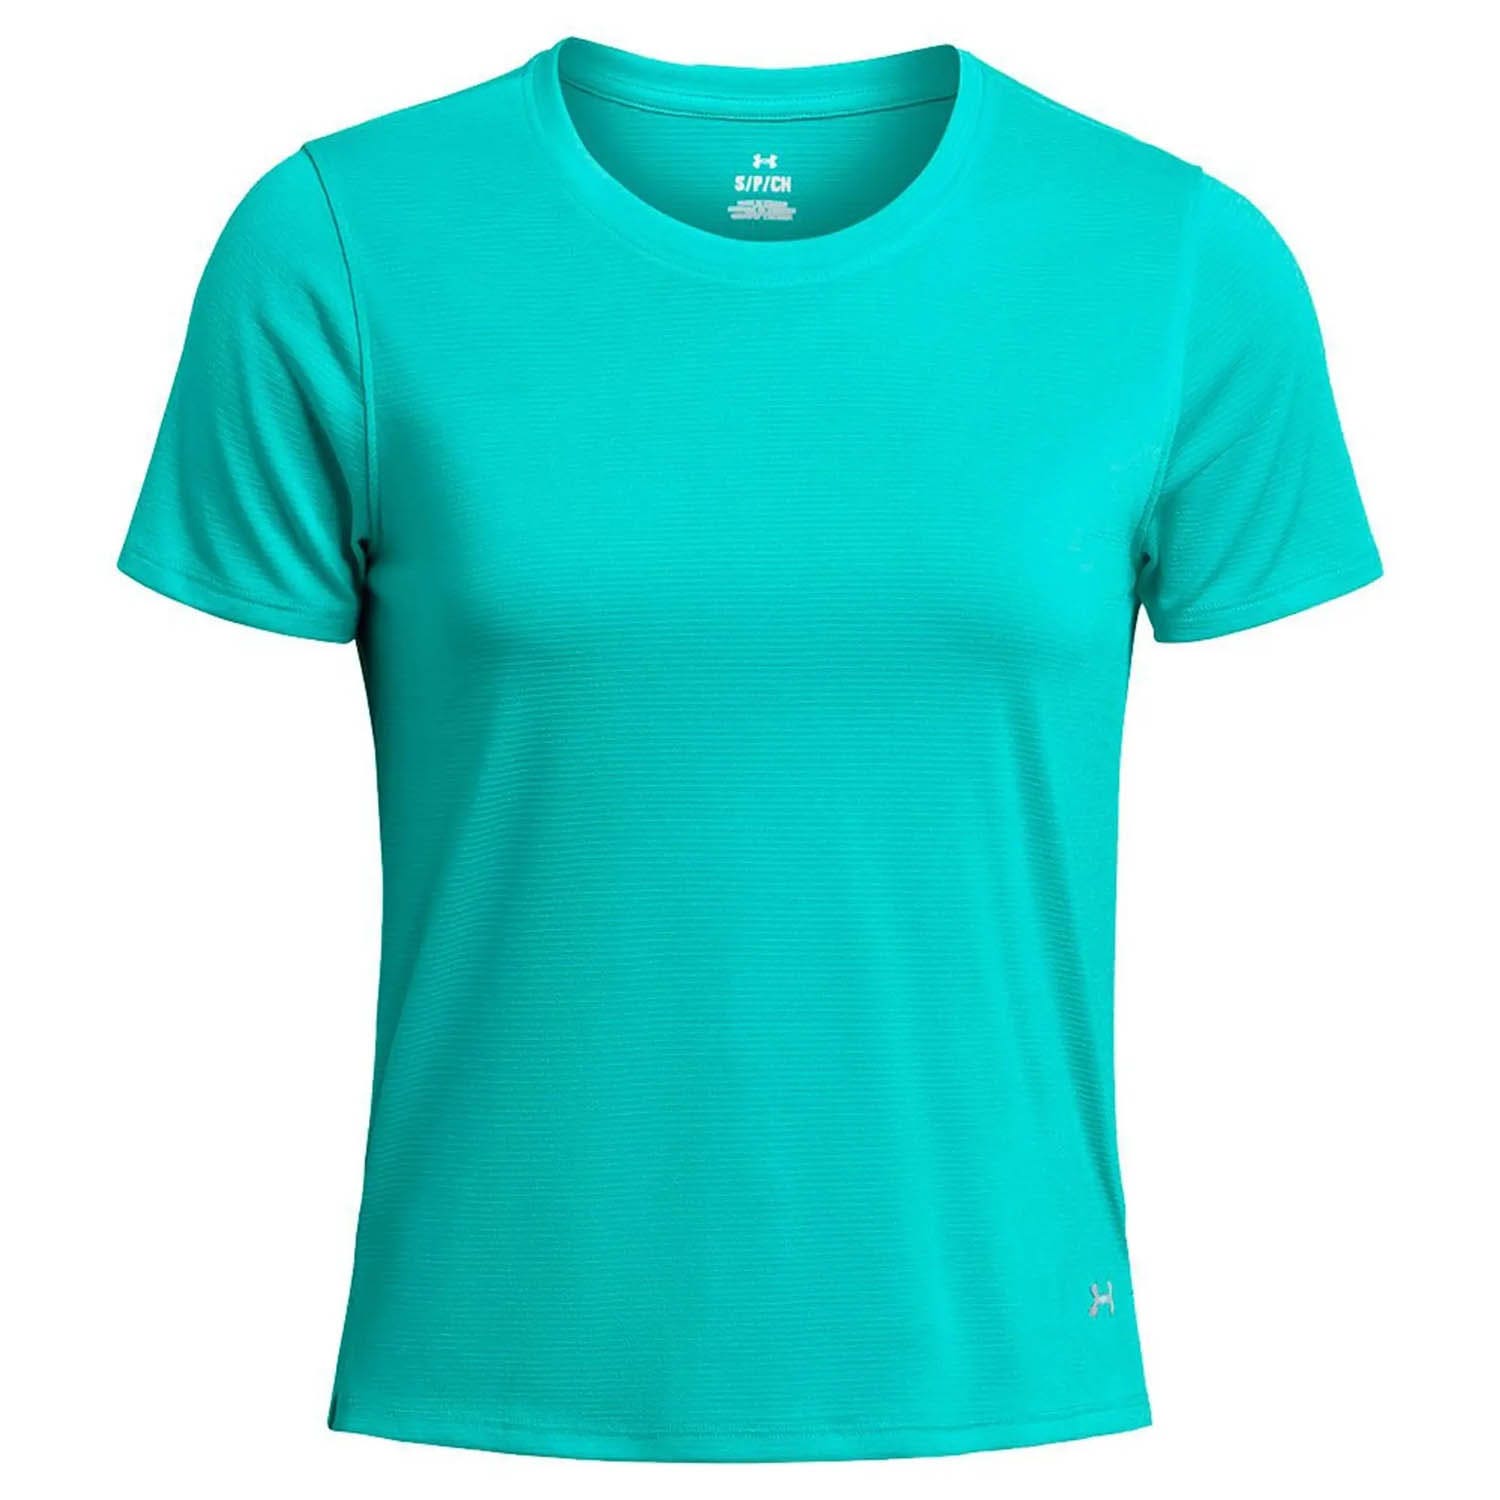 UNDER ARMOUR Launch T-Shirt Damen 482 - radial turquoise/reflective